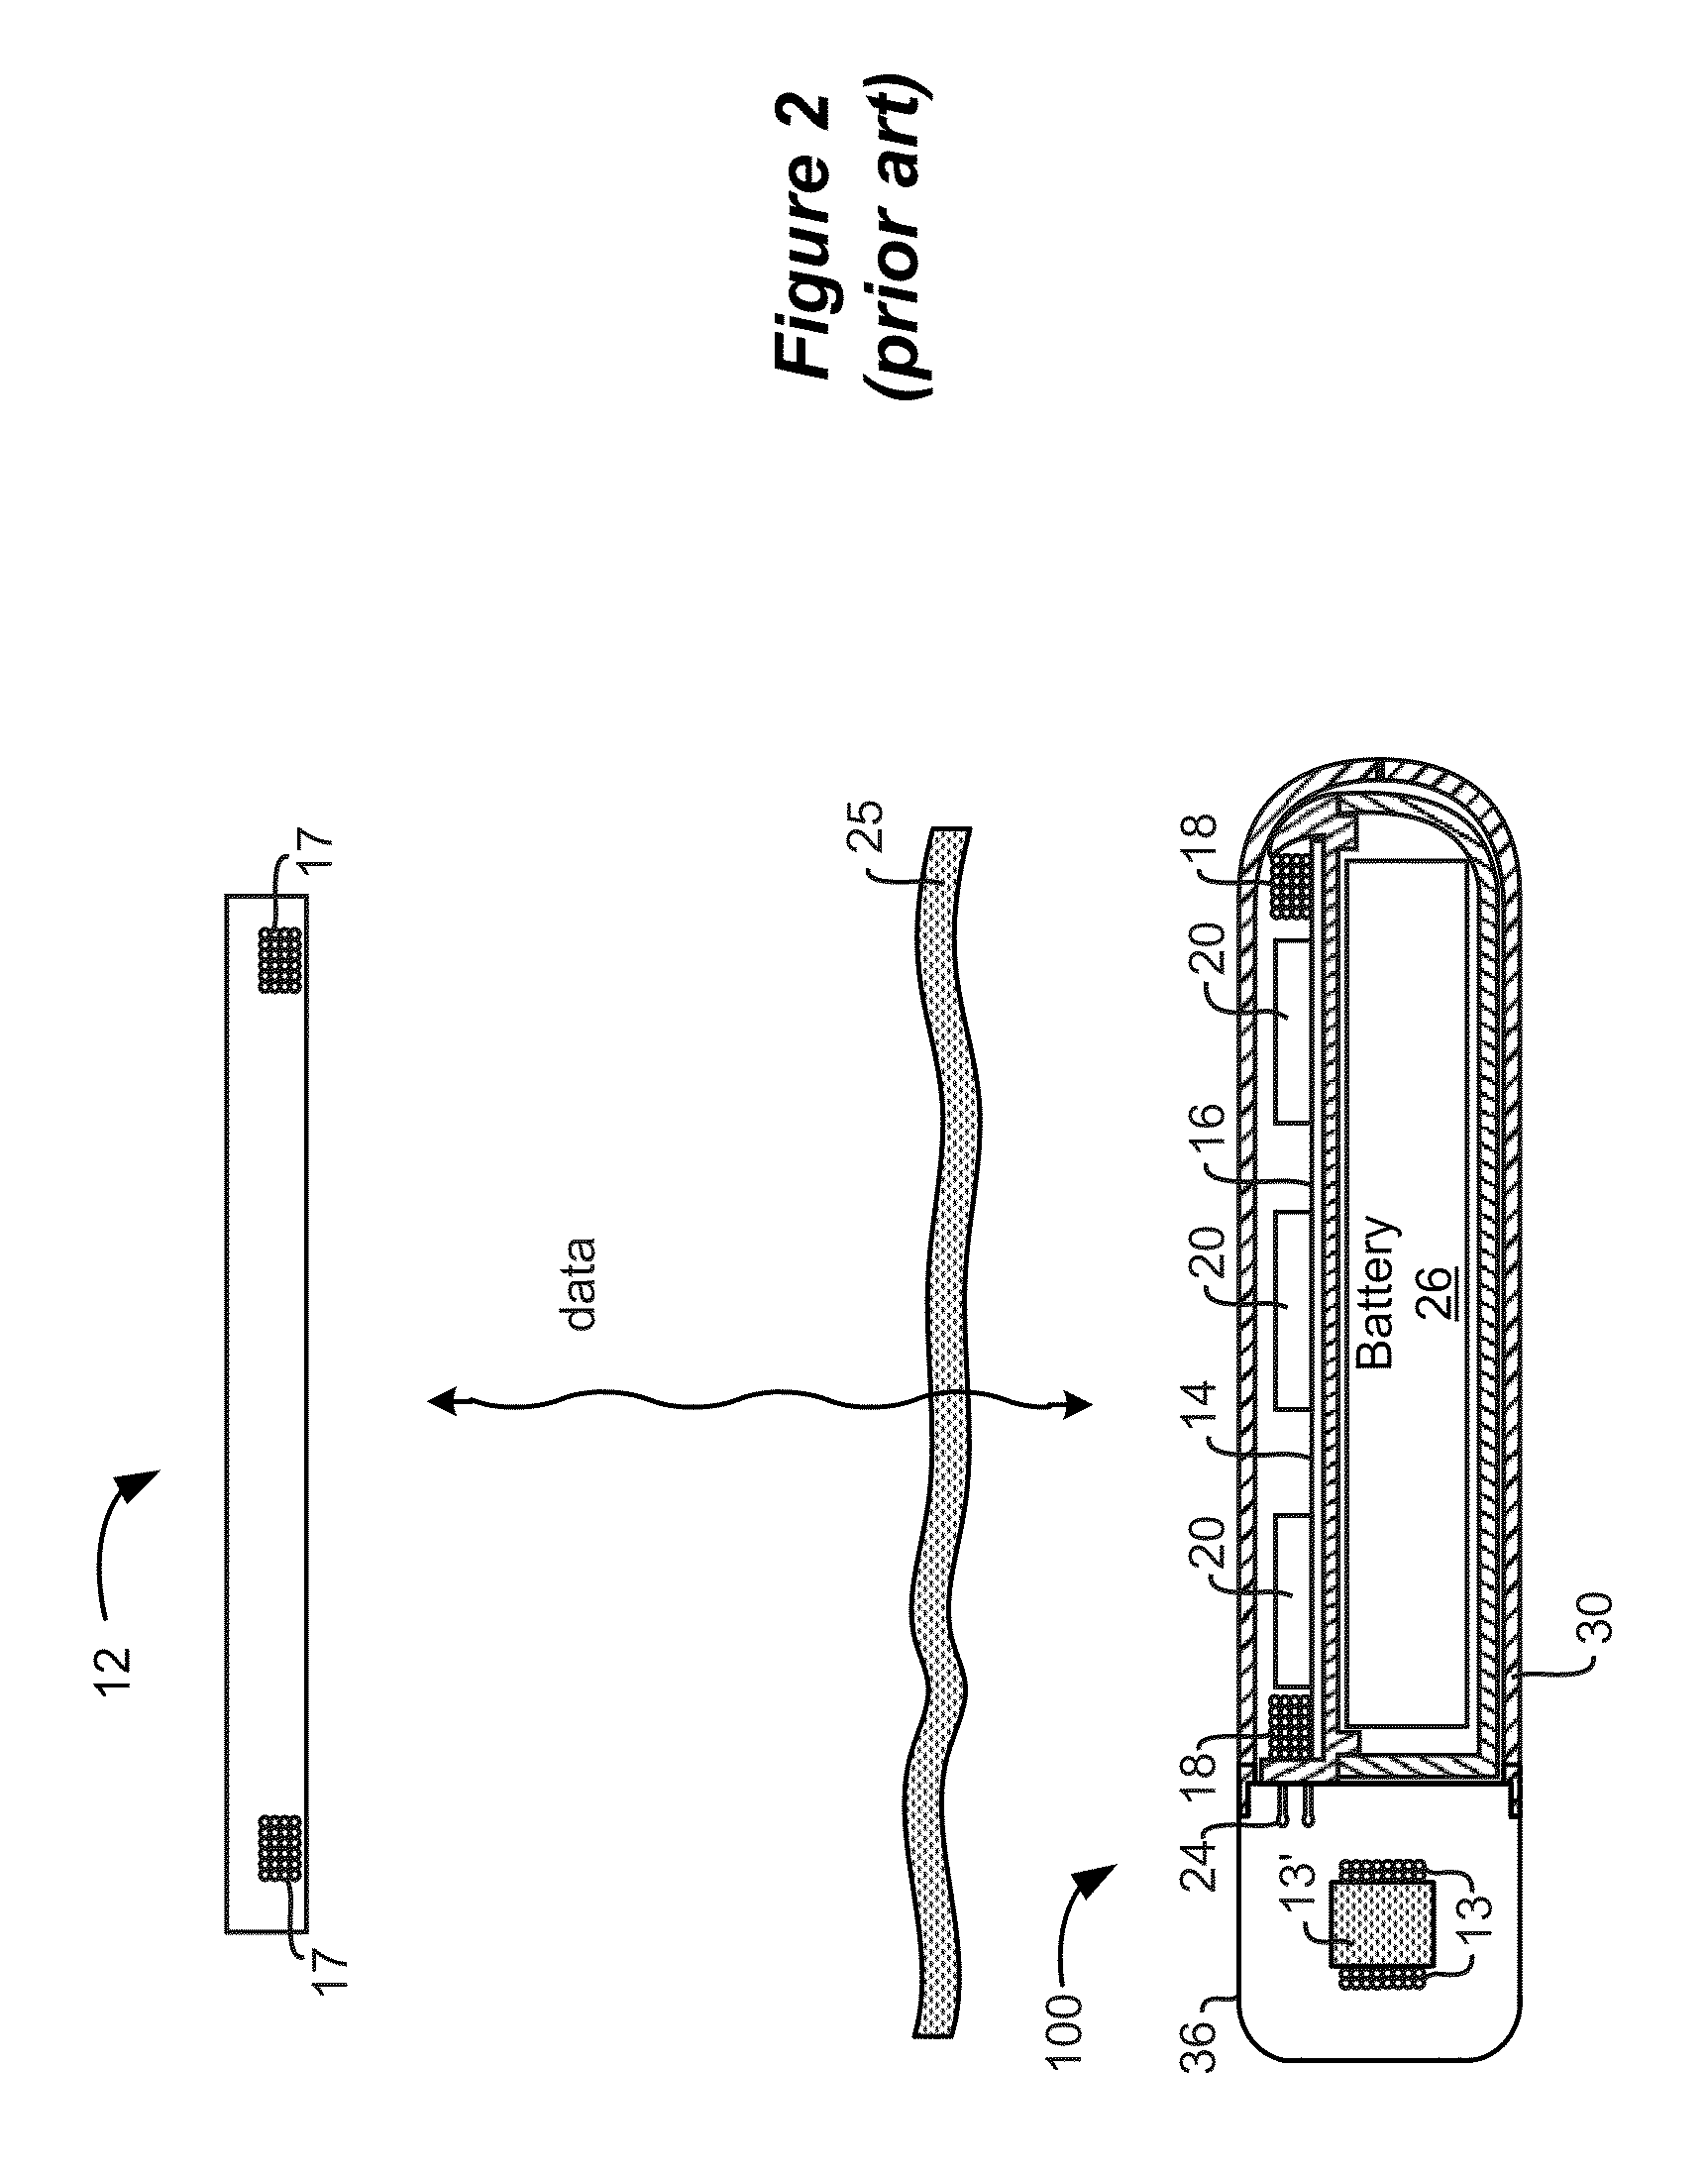 External Device for an Implantable Medical System Having Accessible Contraindication Information